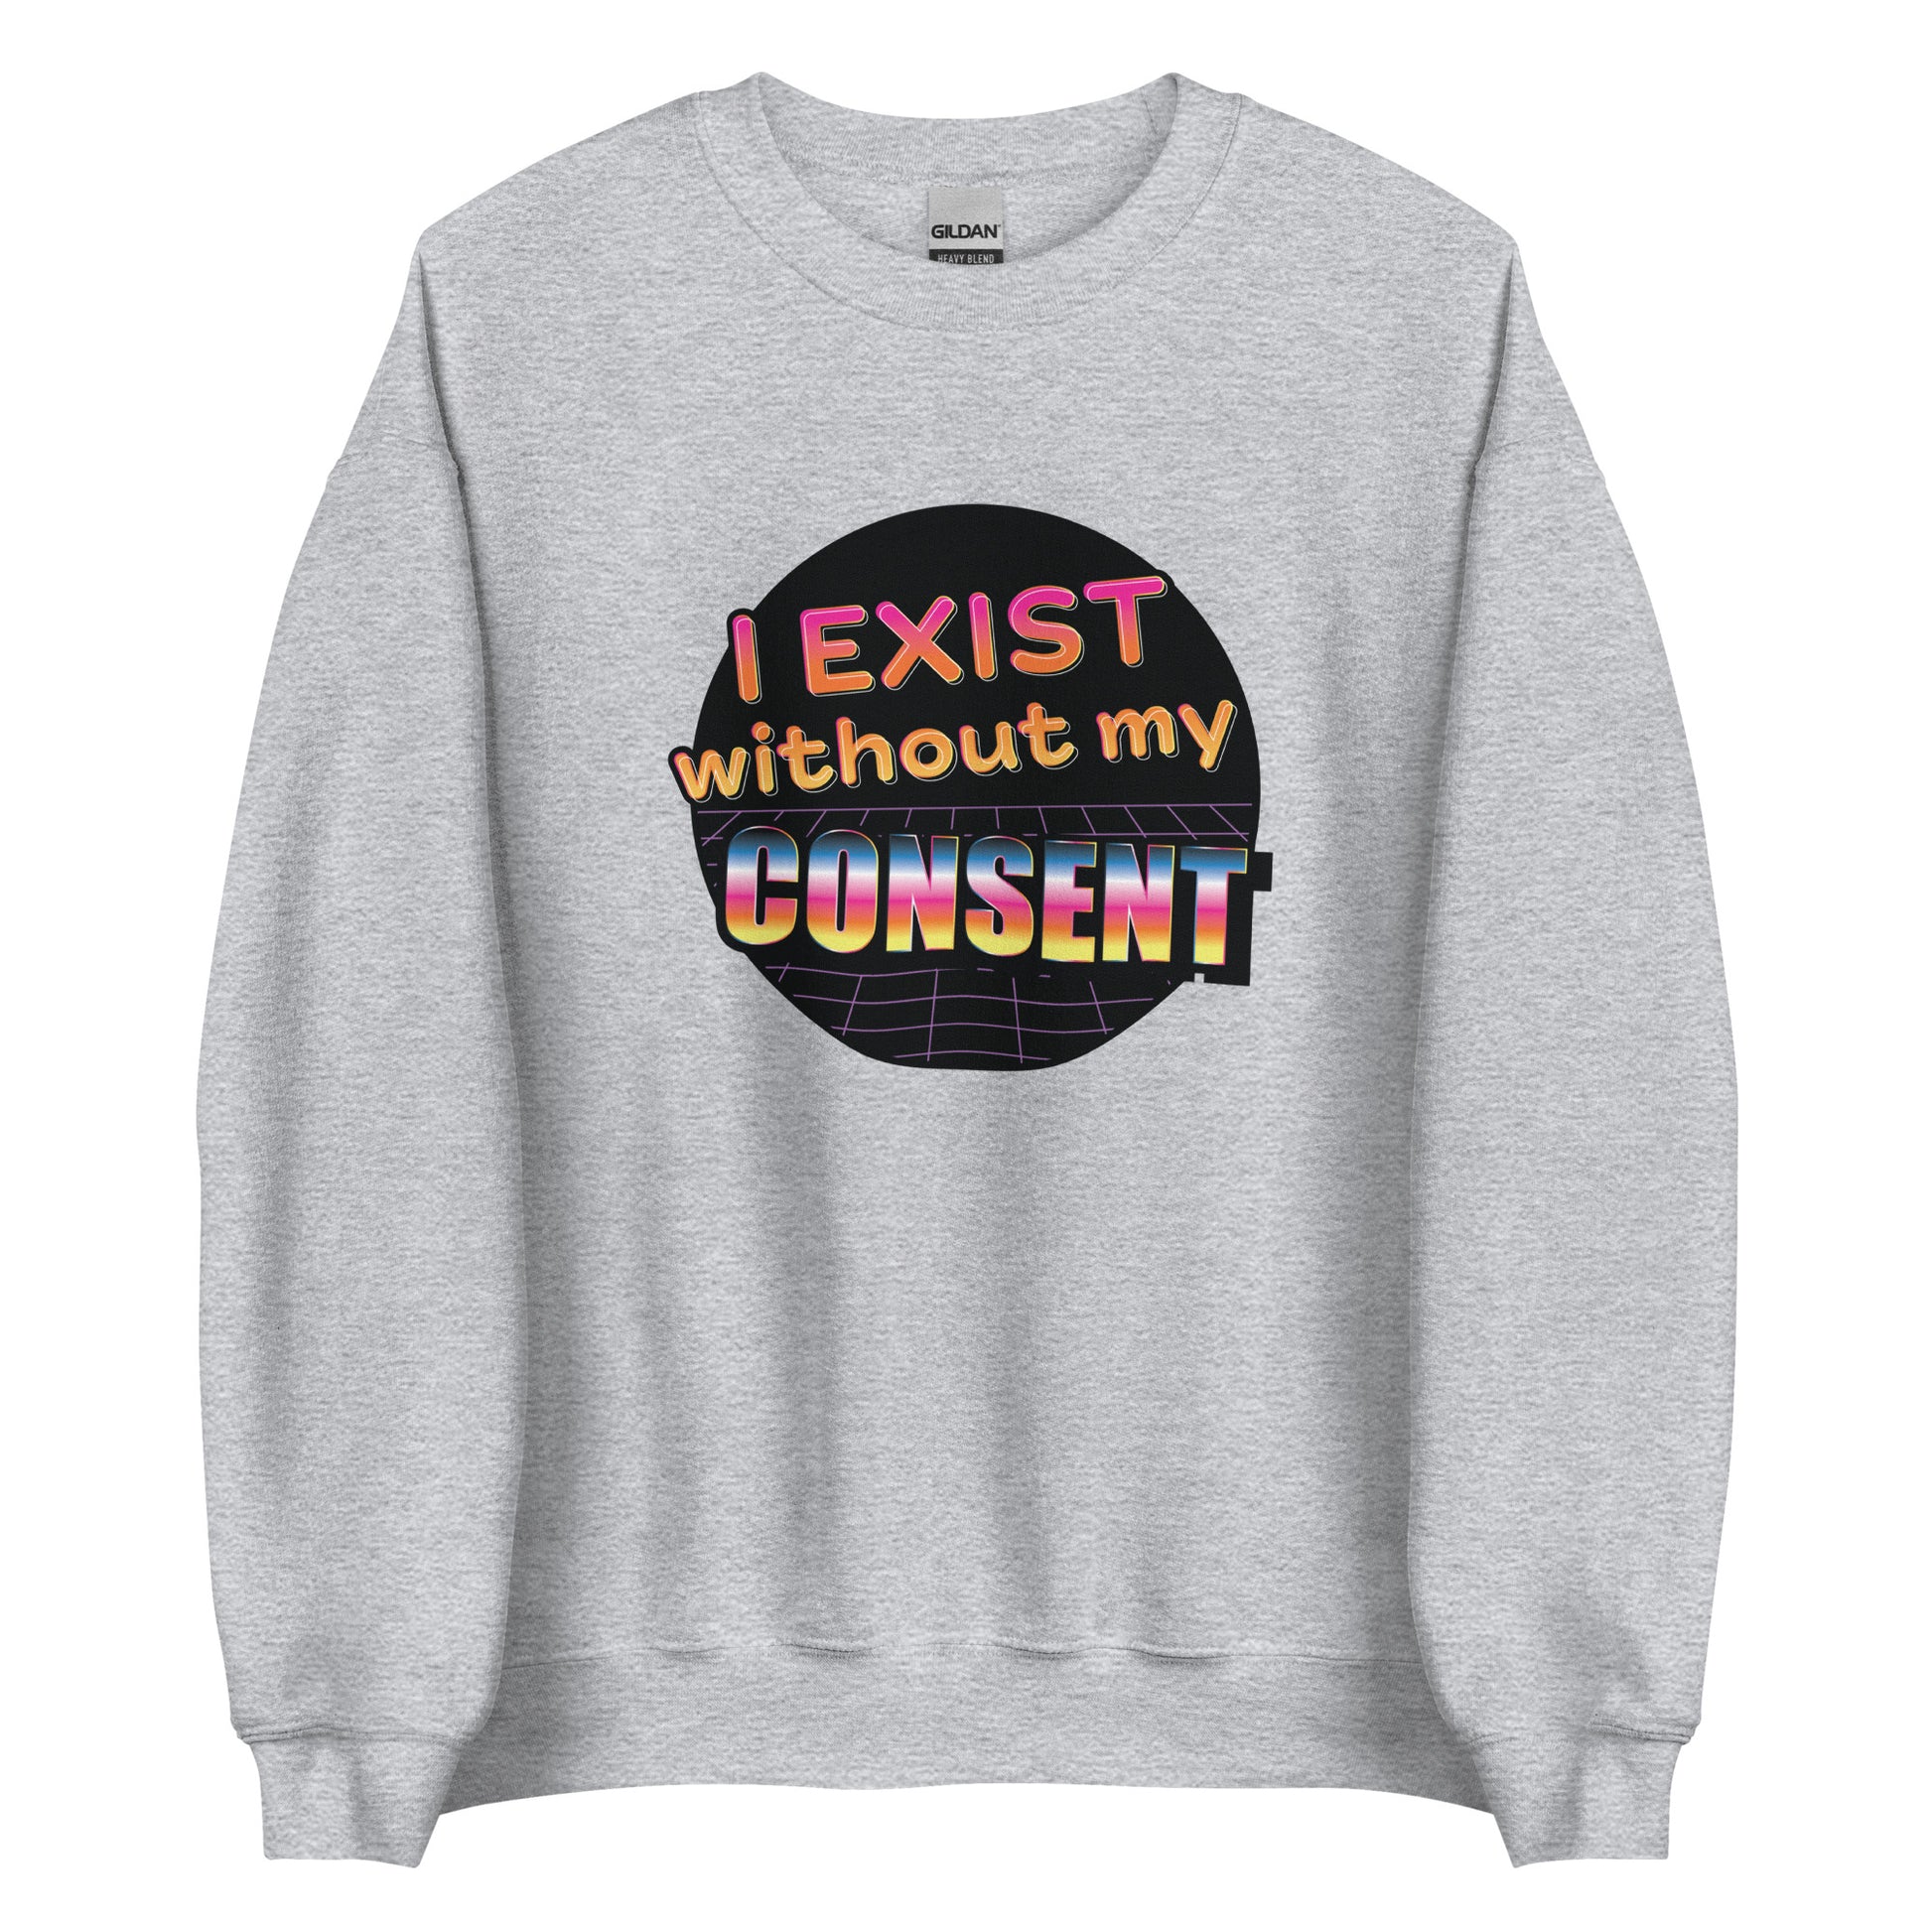 A grey crewneck sweatshirt featuring a brightly colored 80's style graphic with colorful text that reads "I exist without my consent"